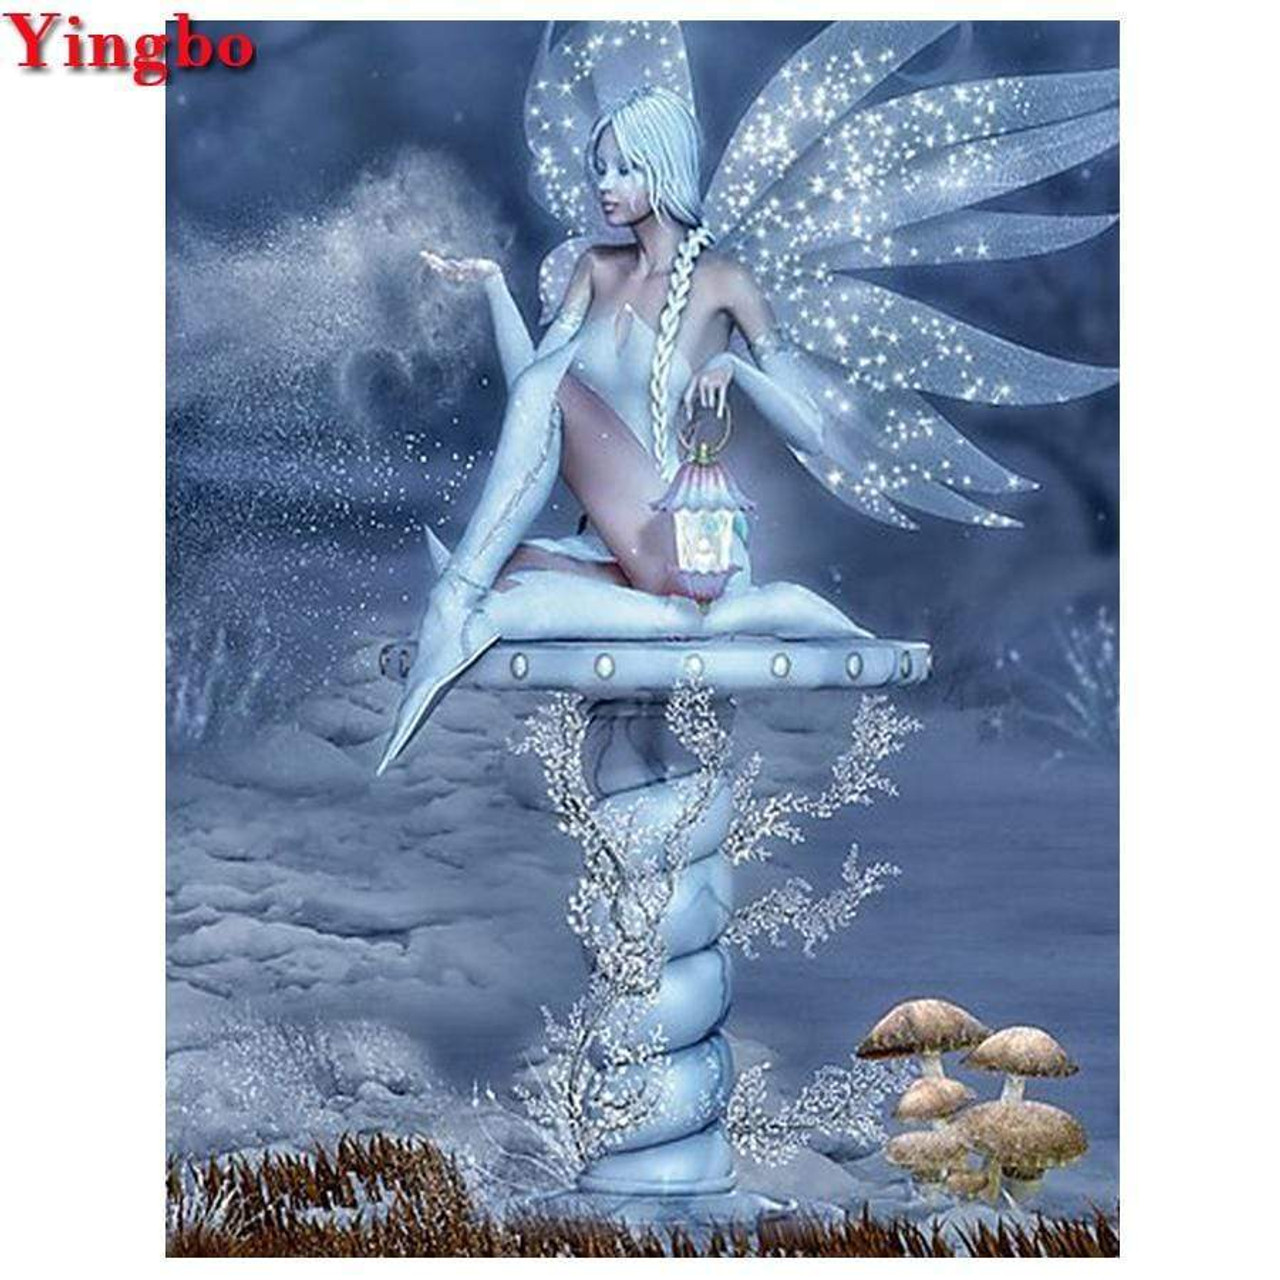  Wings Fairy Diamond Painting Kits 5D Diamond Art Kits for  Adults, Large Size (24x12 Inch), DIY Paint by Numbers, Diamond Dots,  Crystal Rhinestone Arts Embroidery Craft, Room/Home/Wall Decor Gifts, d25 